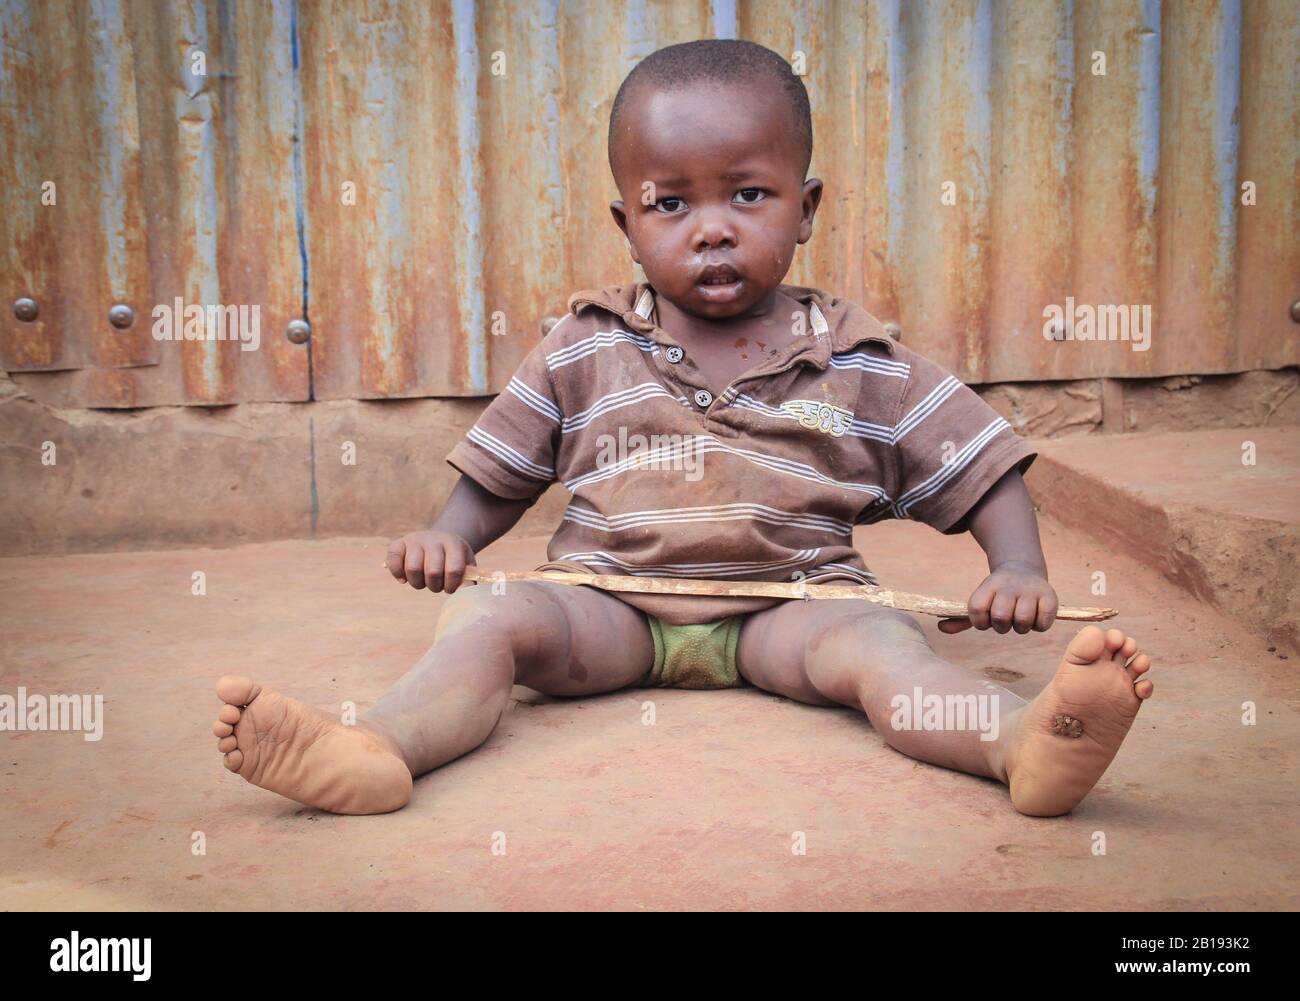 Kibera, Nairobi, Kenya - February 13, 2015: a small dirty black child sits on the floor in the slums and holds a stick in his hands Stock Photo